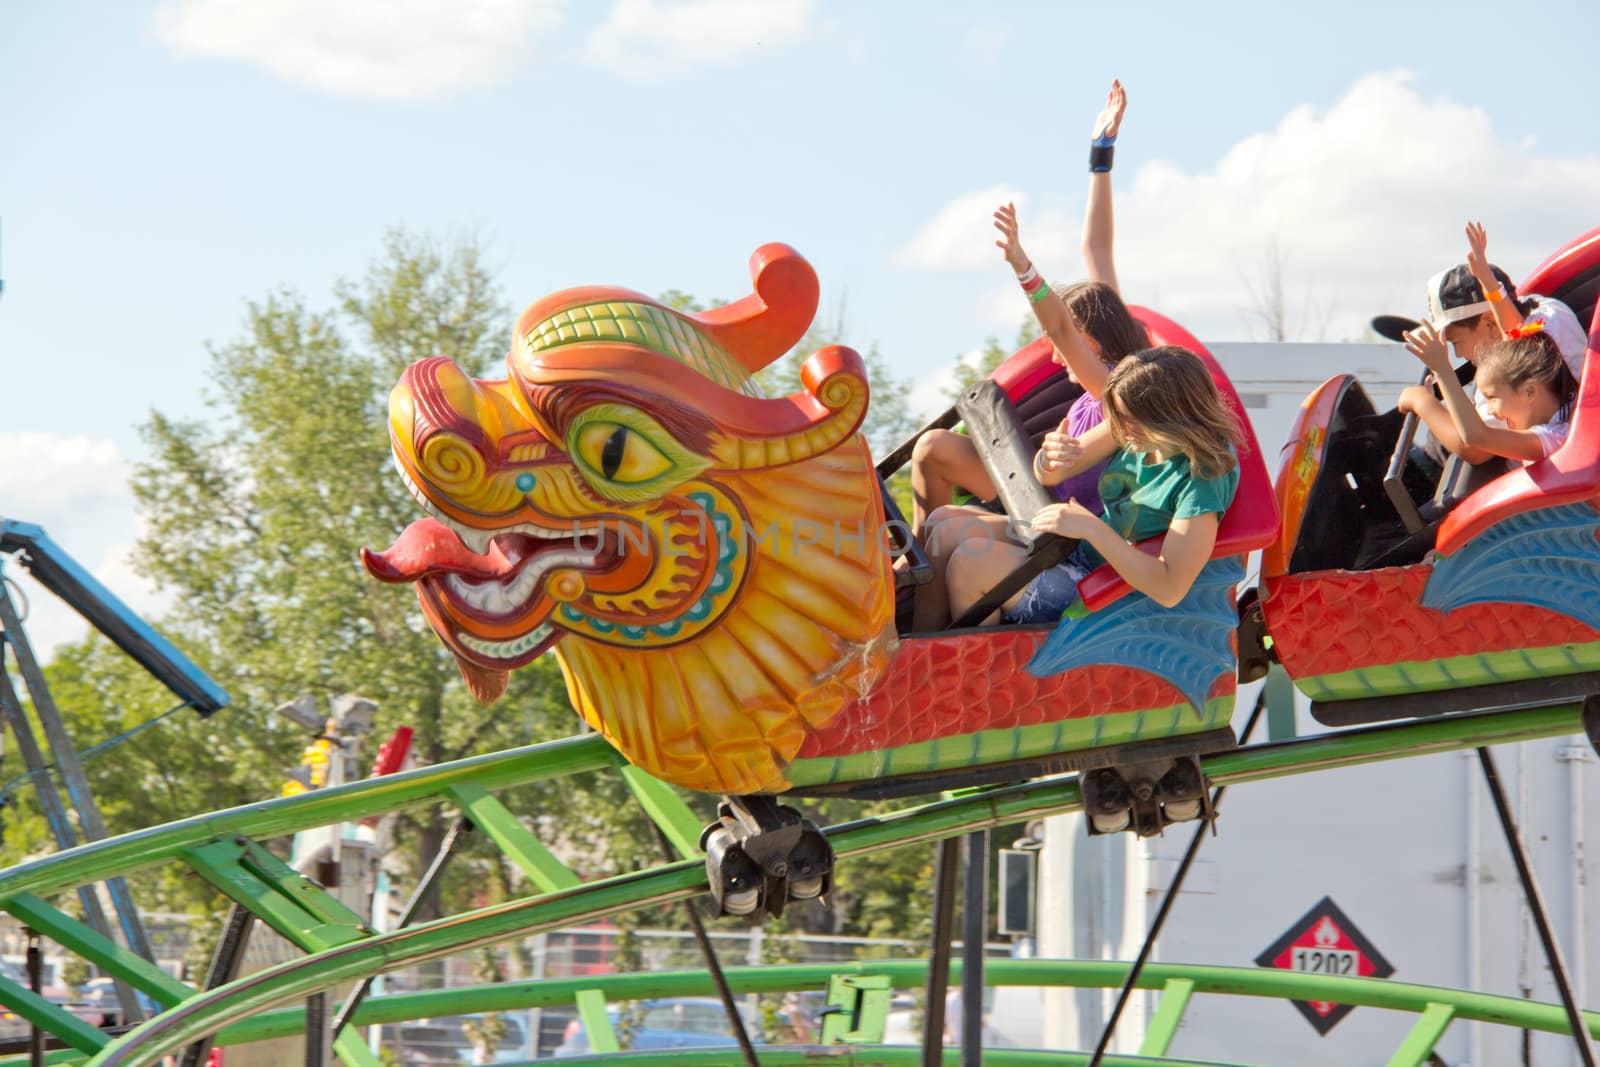 Kids riding the dragon roller coaster as it zooms on its track